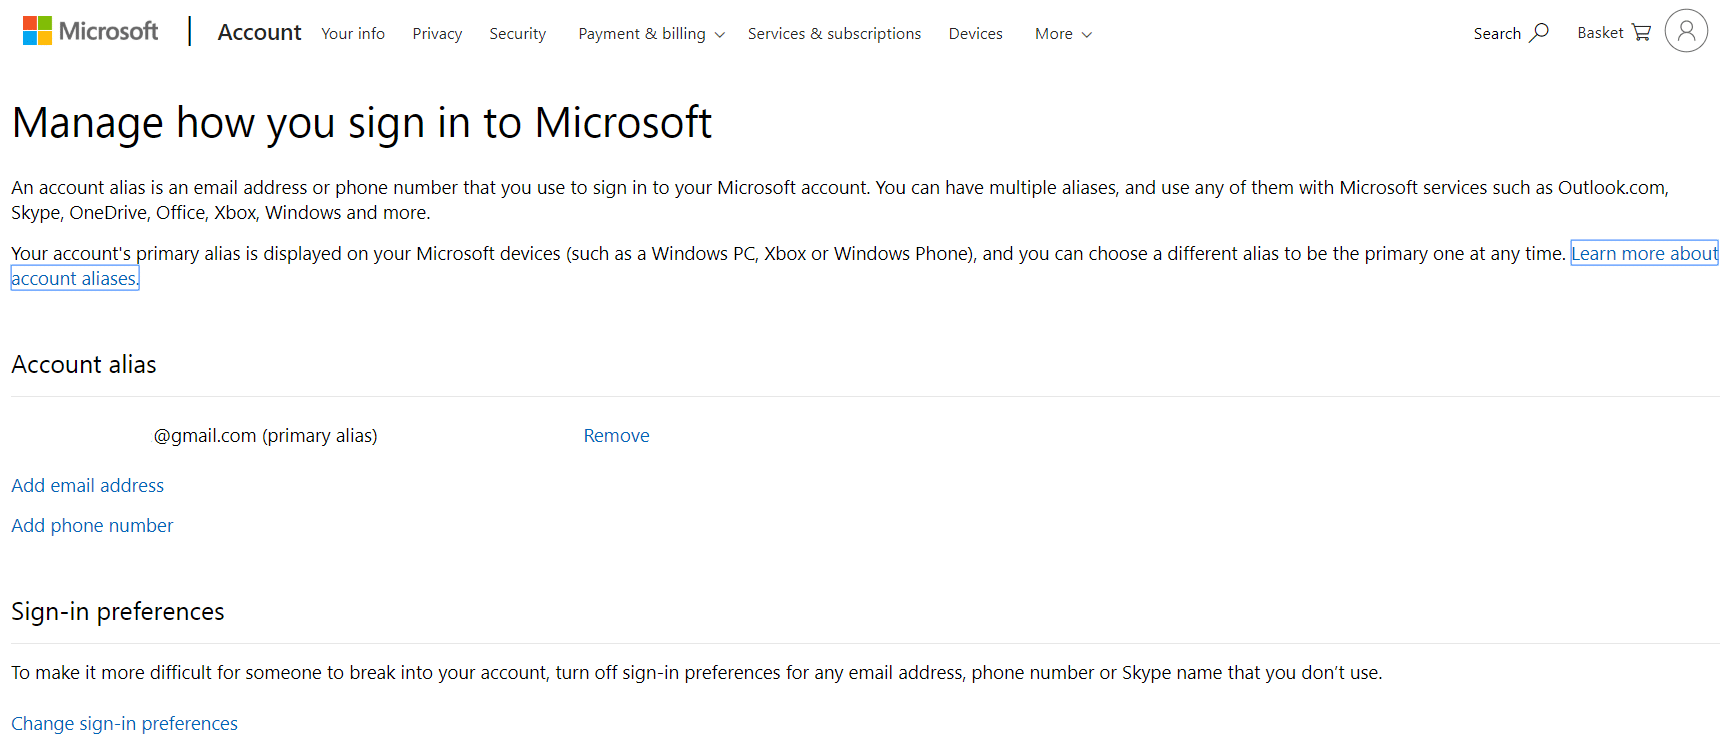 Change your email id linked with your account then click on Manage how you sign in to Microsoft